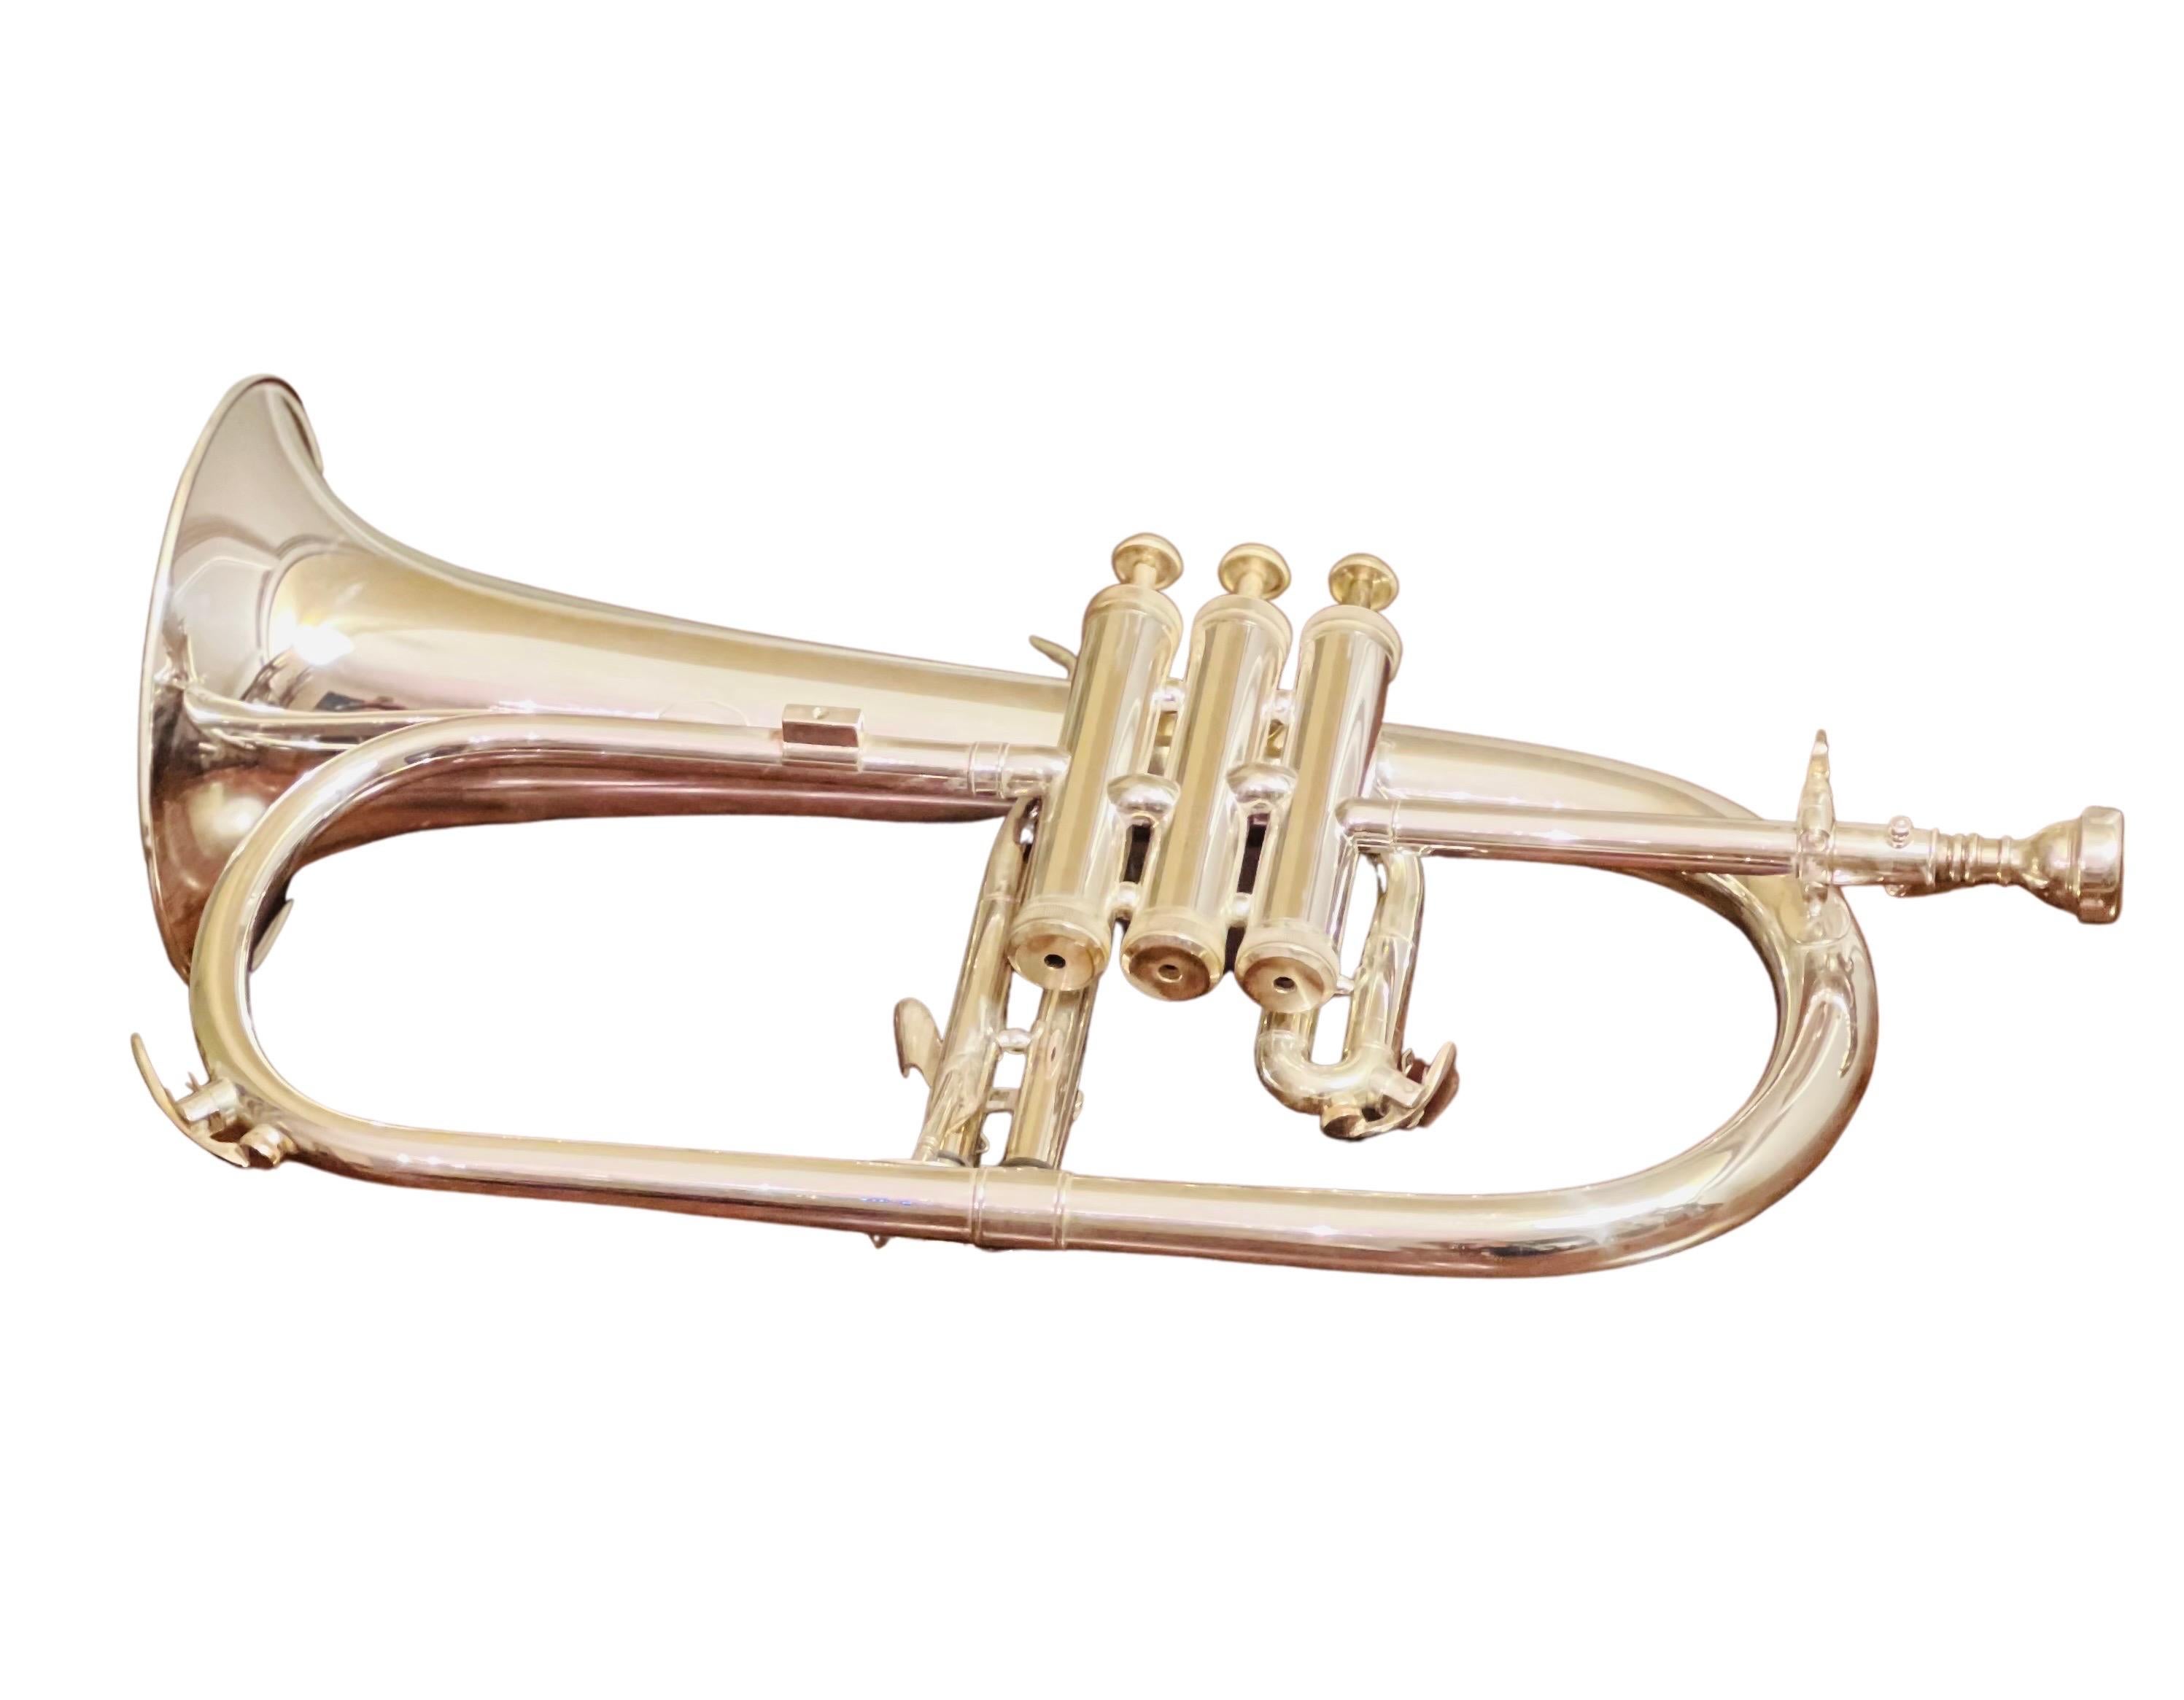 R.S. Berkely Silver Plated Flugelhorn, 2006 In Good Condition For Sale In Doylestown, PA